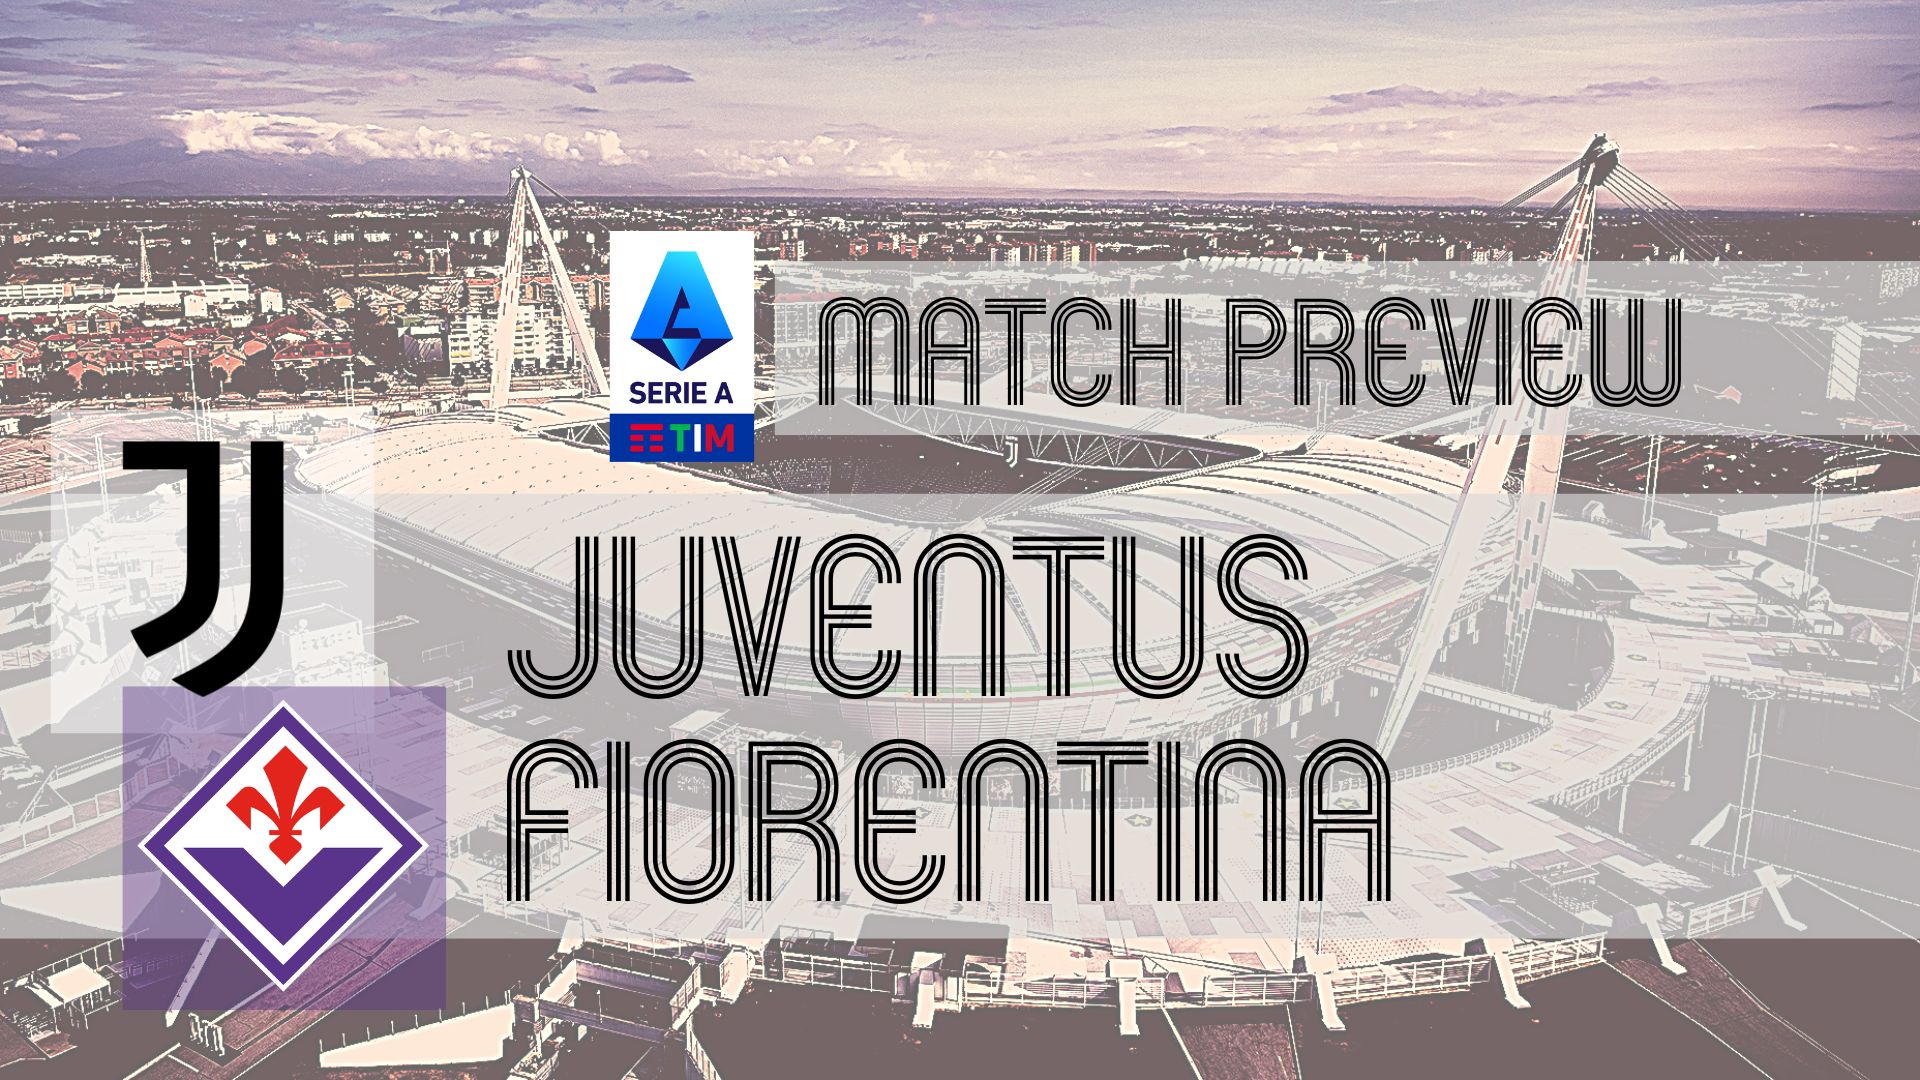 Inspired by a mini-revival, Juventus will be looking to maintain recovery following a 15-point deduction against Fiorentina on Sunday